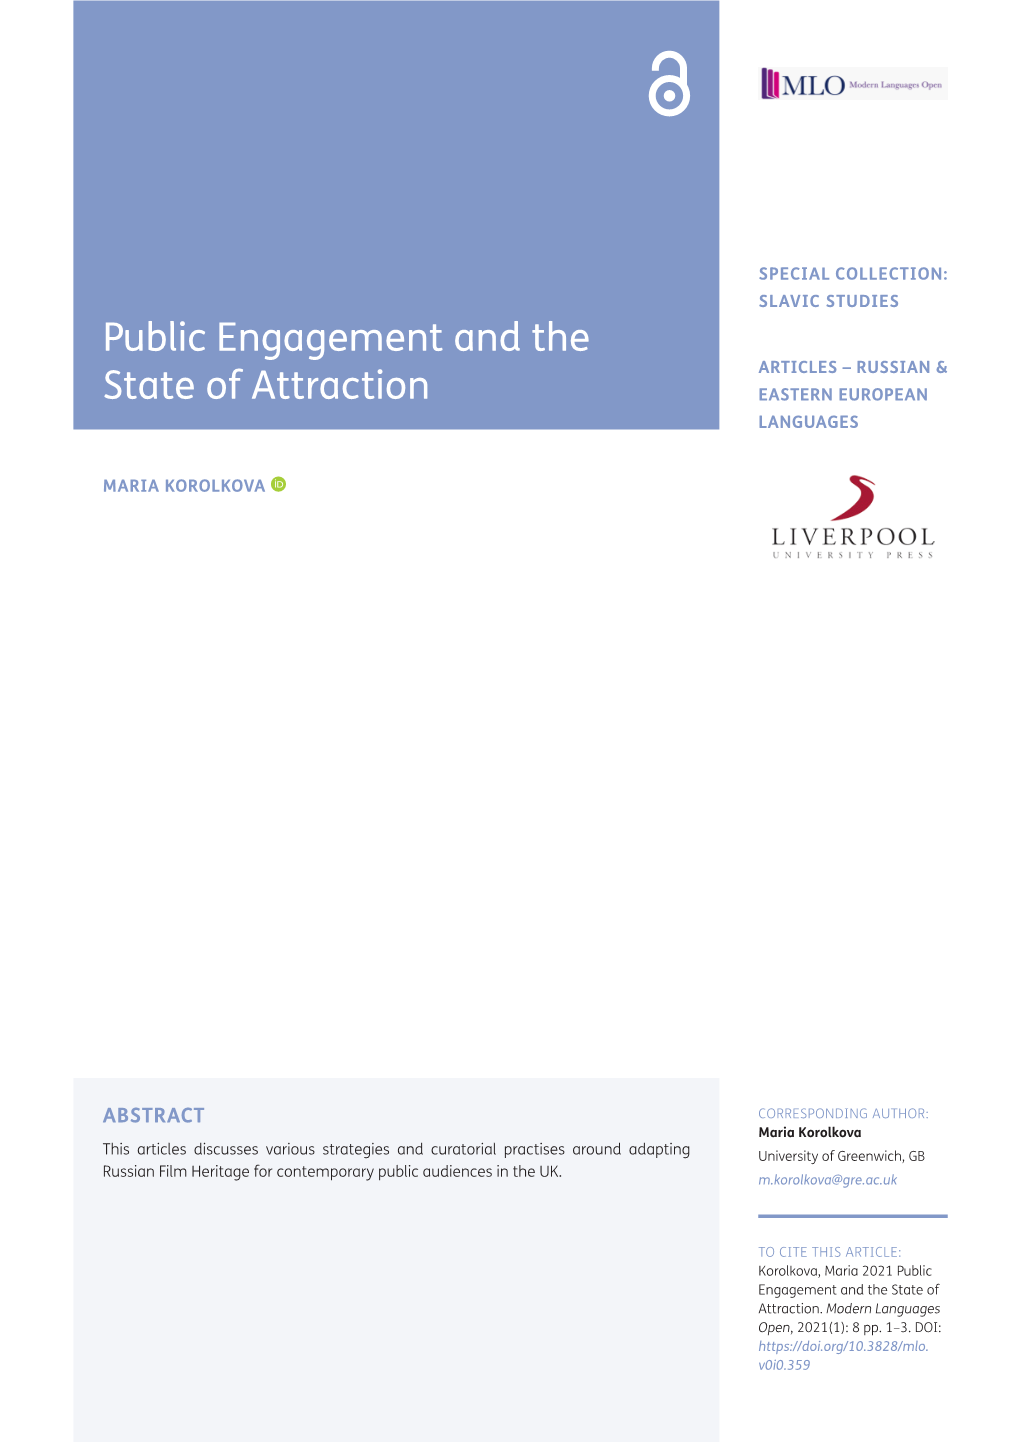 Public Engagement and the State of Attraction